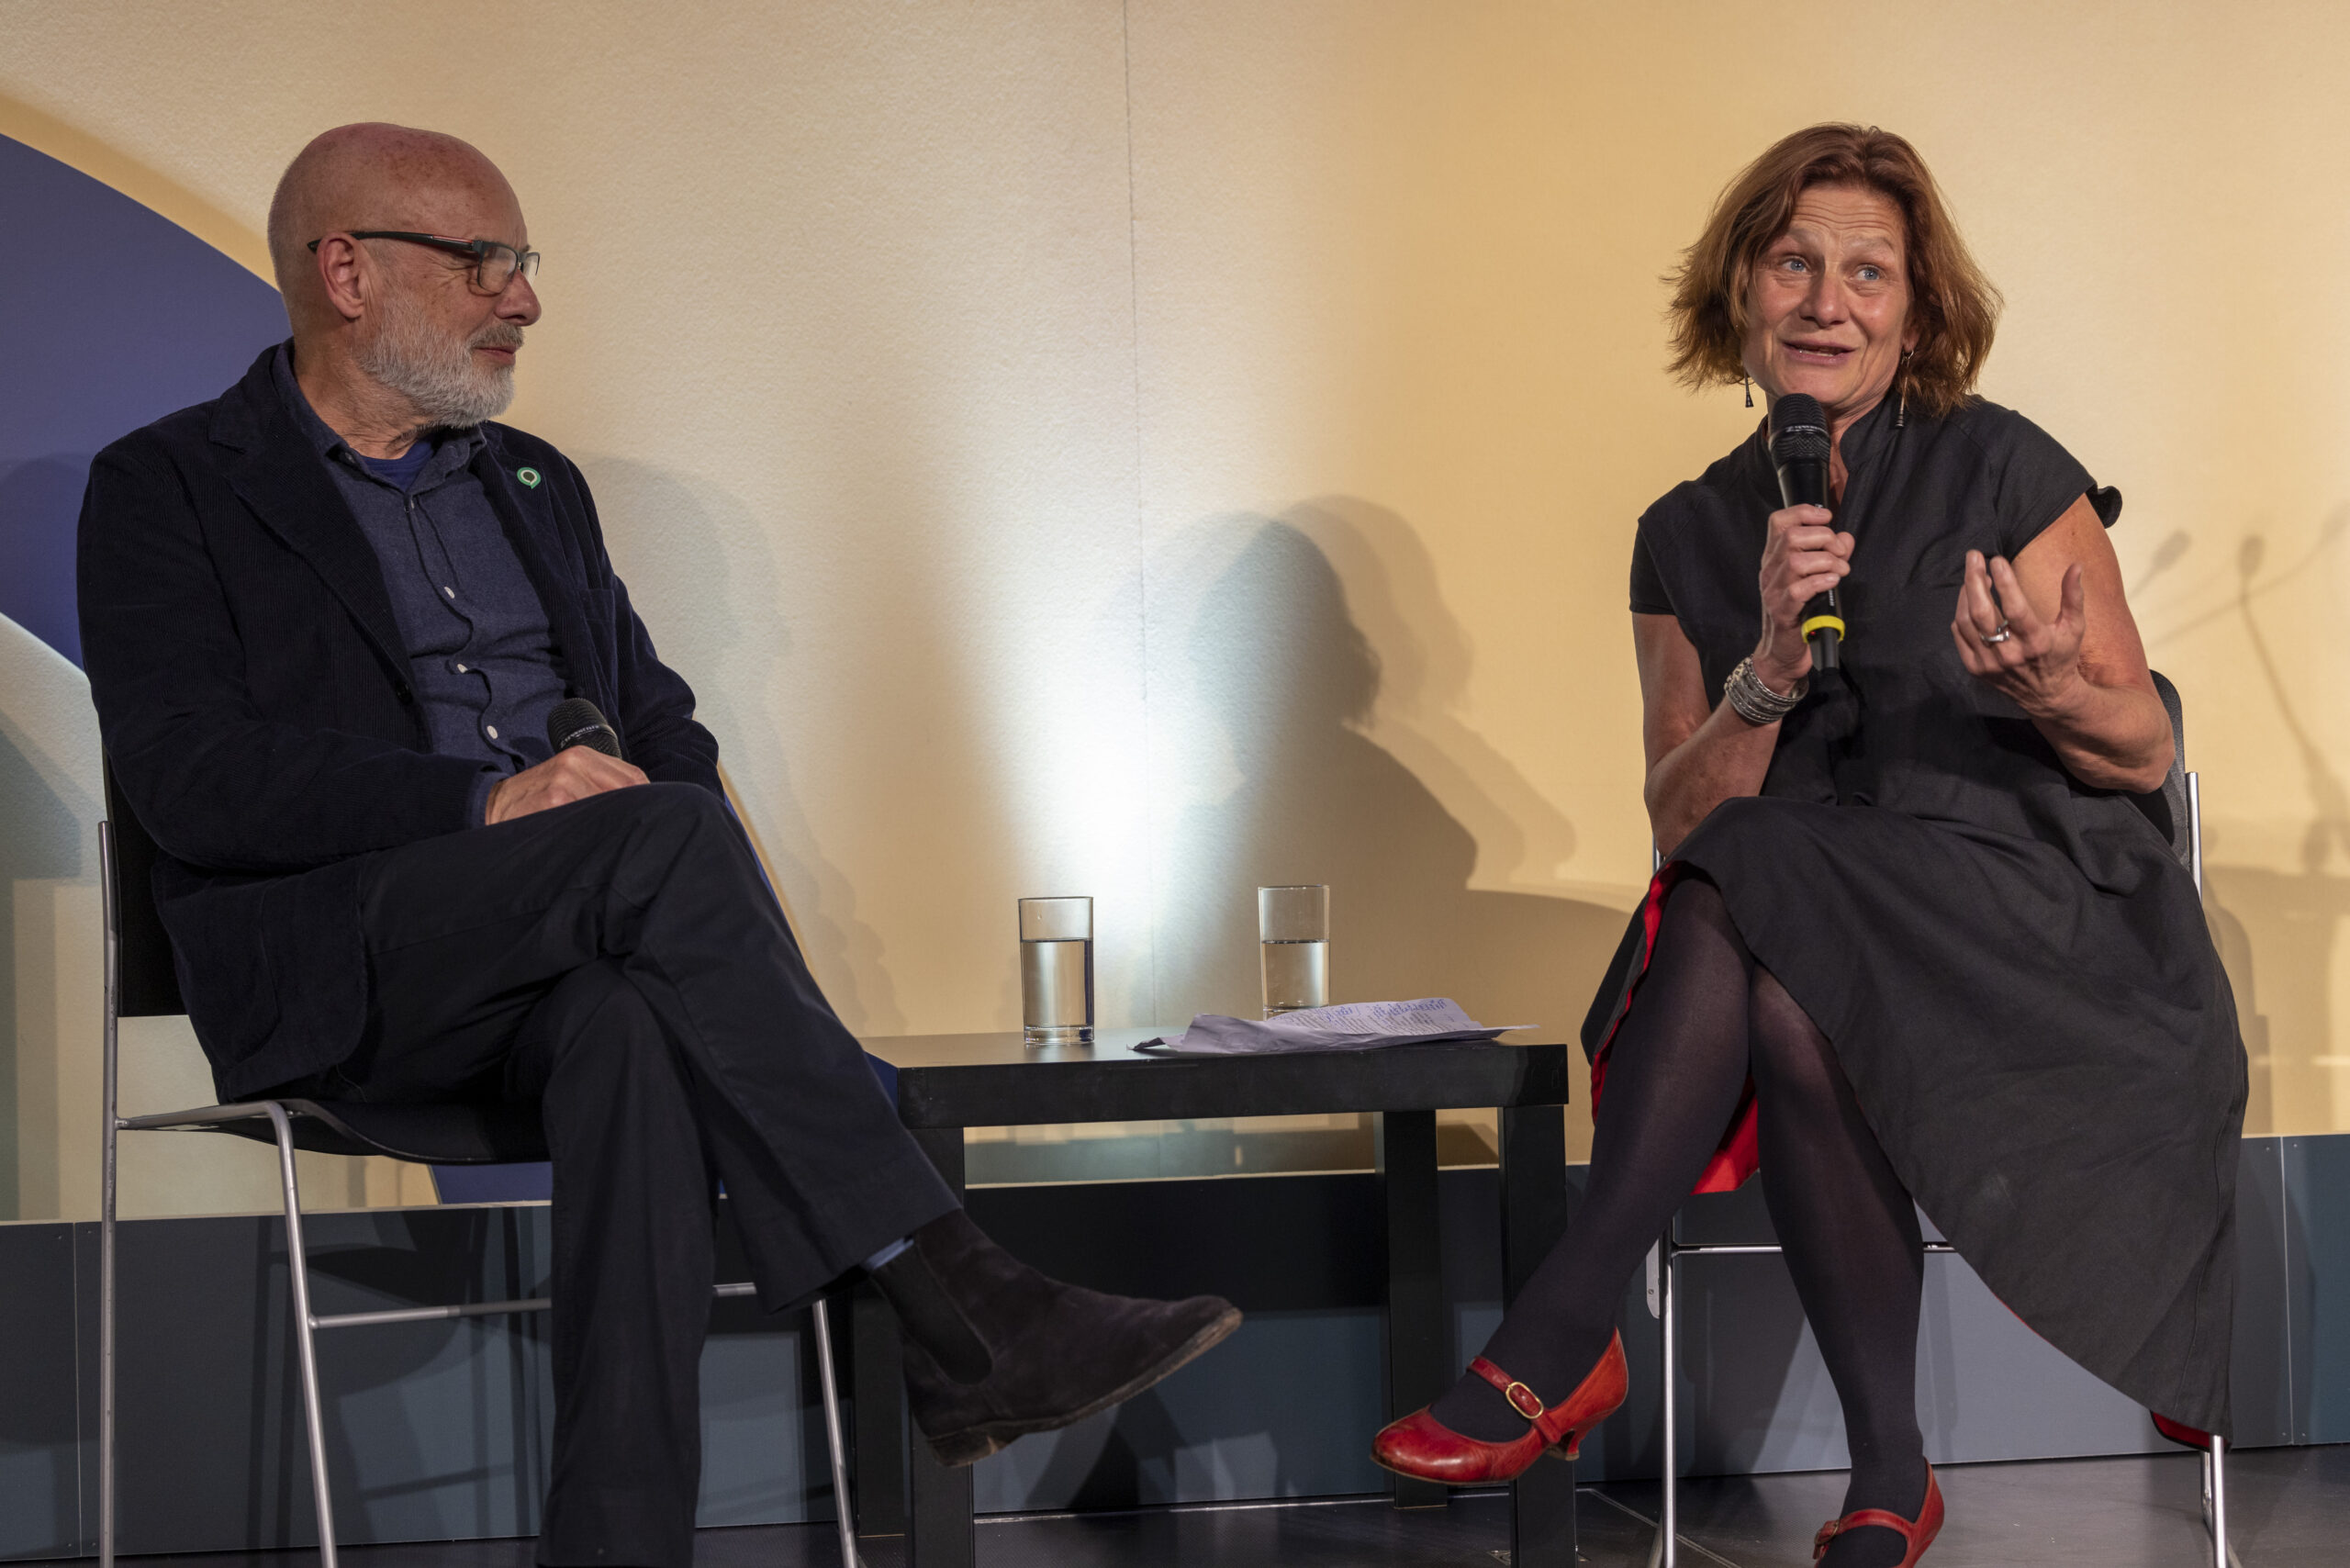 Harriet Lamb in discussion with Brian Eno at the 2022 Ashden Awards, London. Credit Andy Aitchison/Ashden